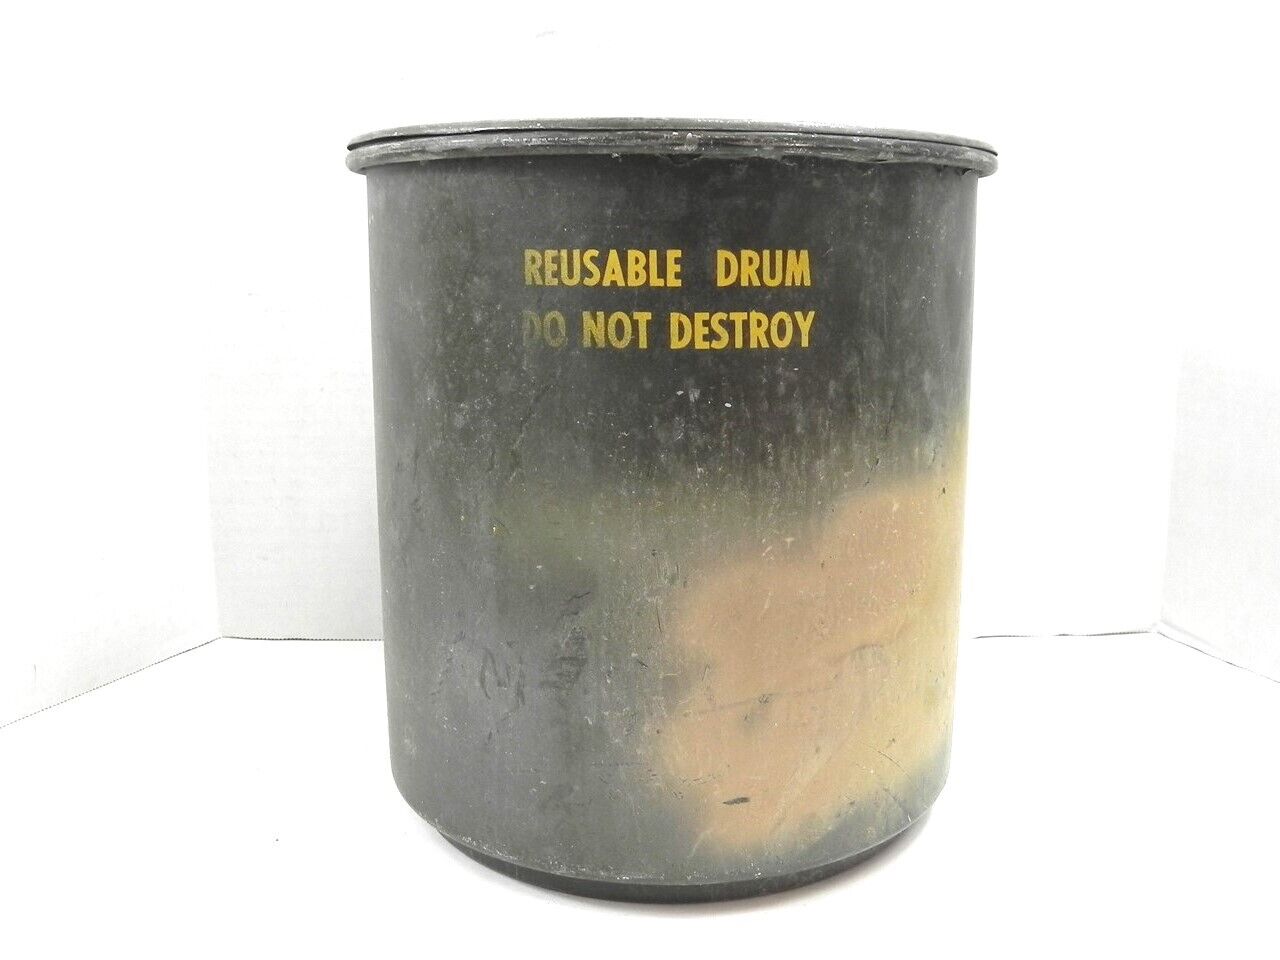 VINTAGE 1950'S-60'S MILITARY REUSABLE DRUM CONTAINER ARMY GREEN OD #1 #MS-24347 